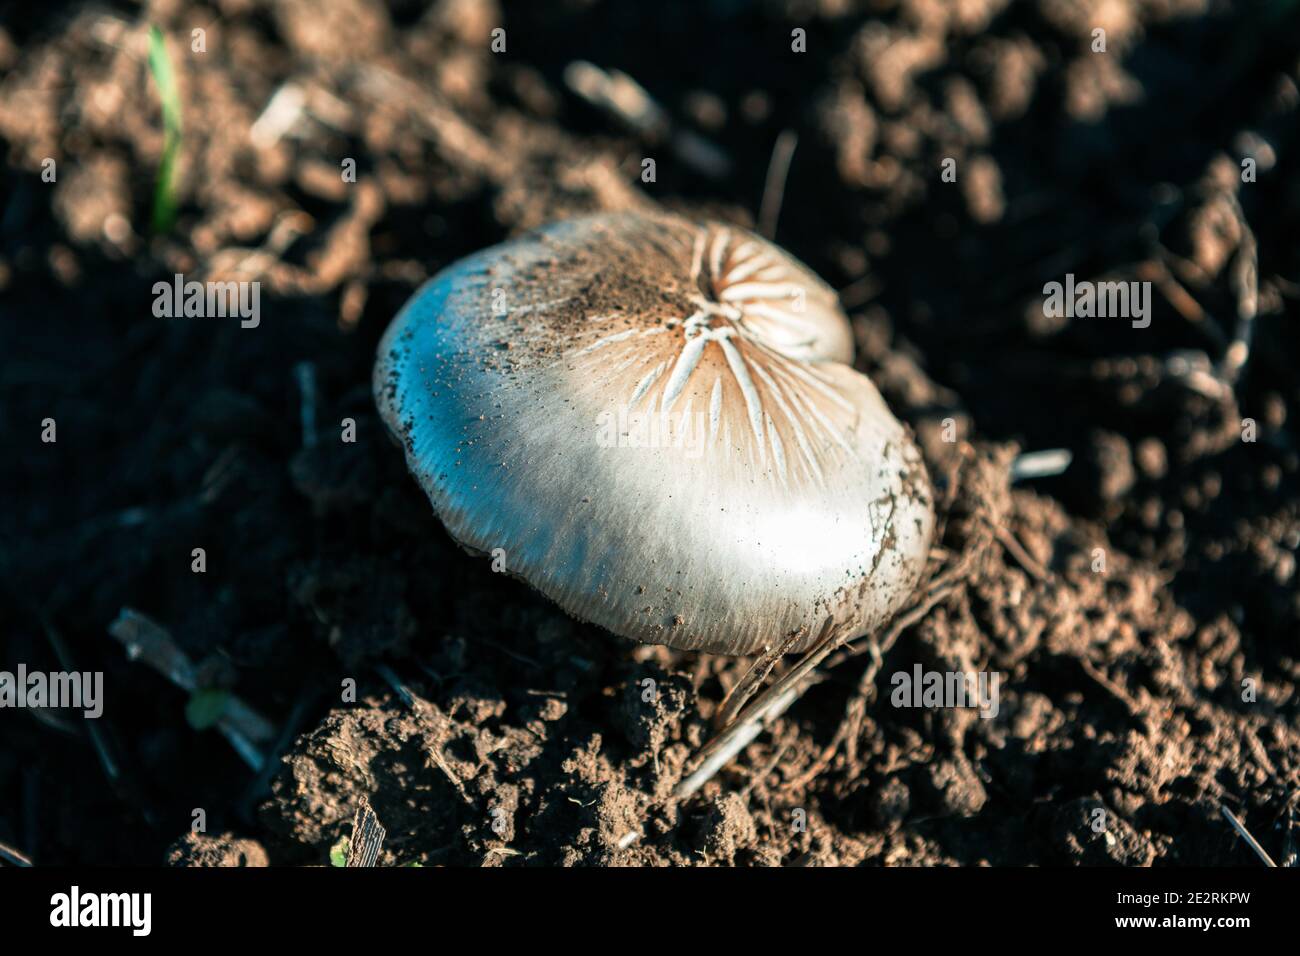 Uncultivated mushroom growing in the forest Stock Photo